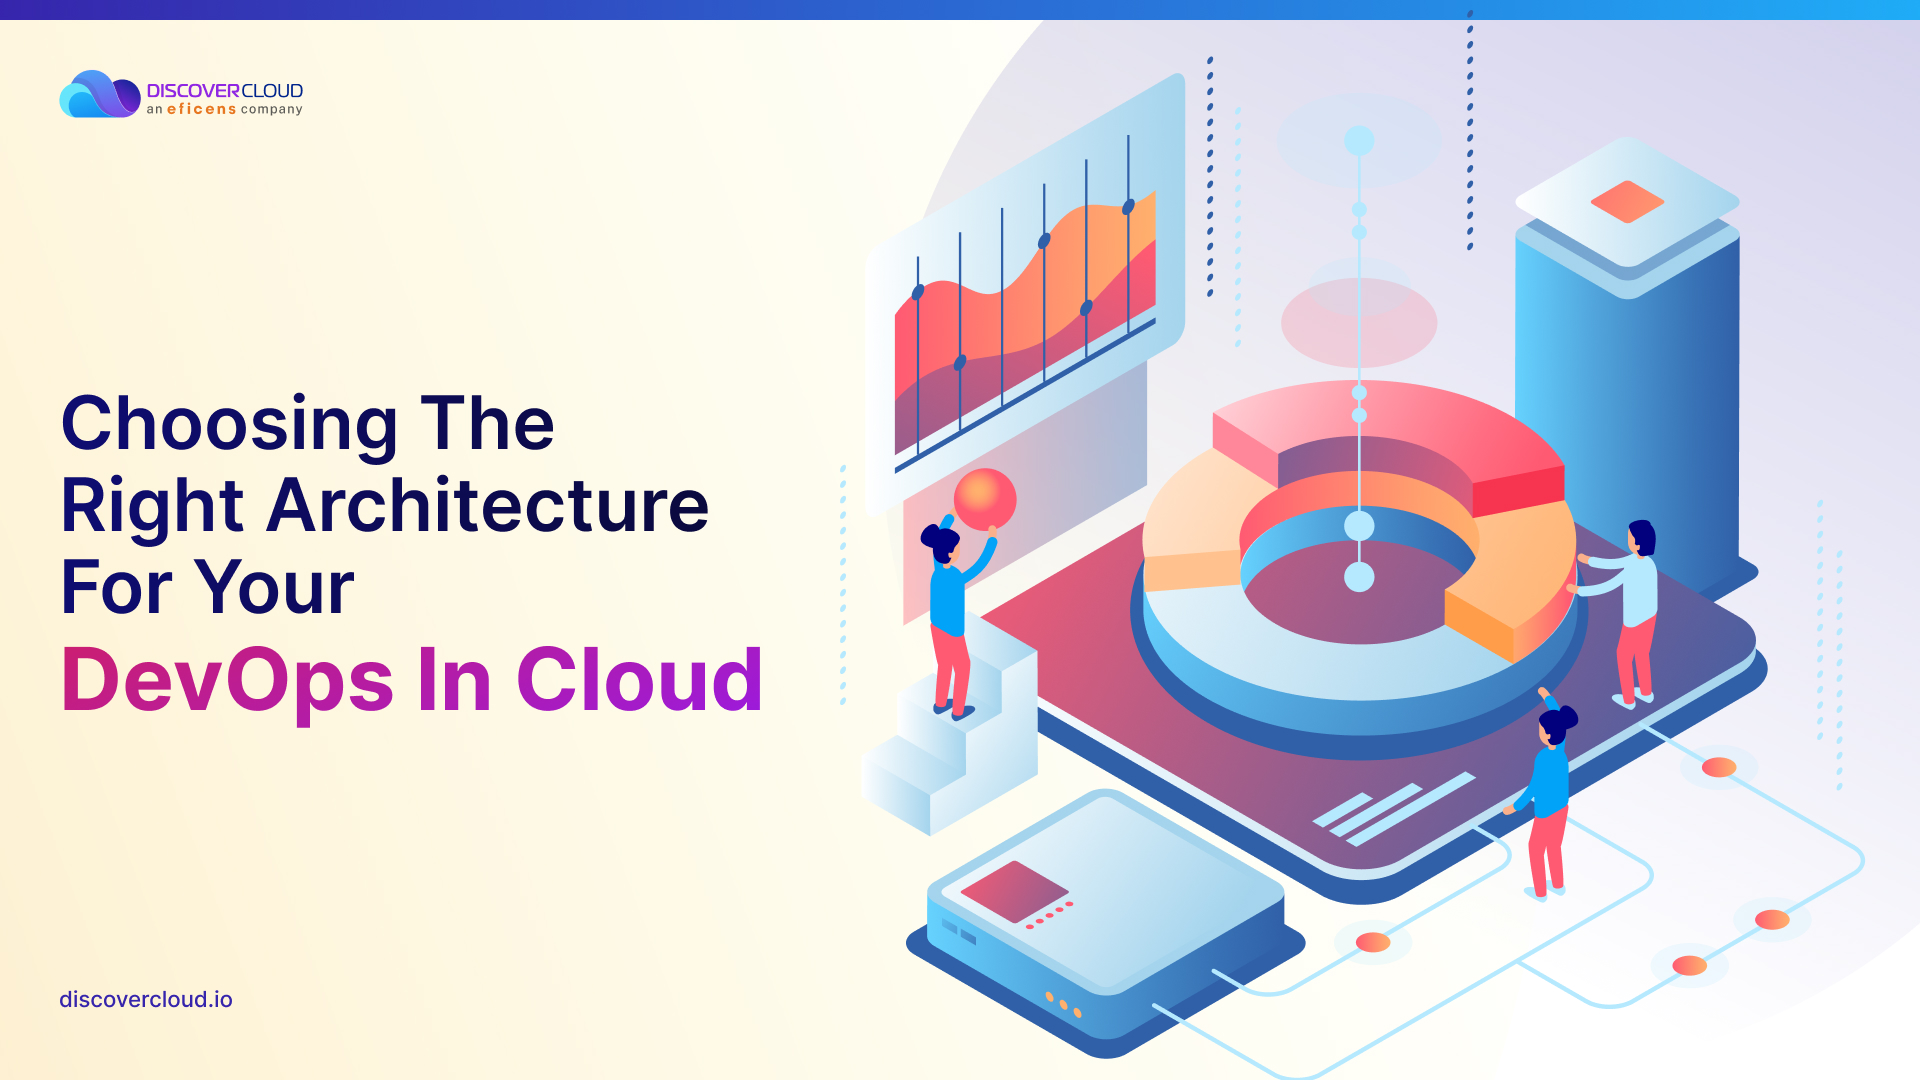 Choosing the Right Architecture for Your DevOps in Cloud